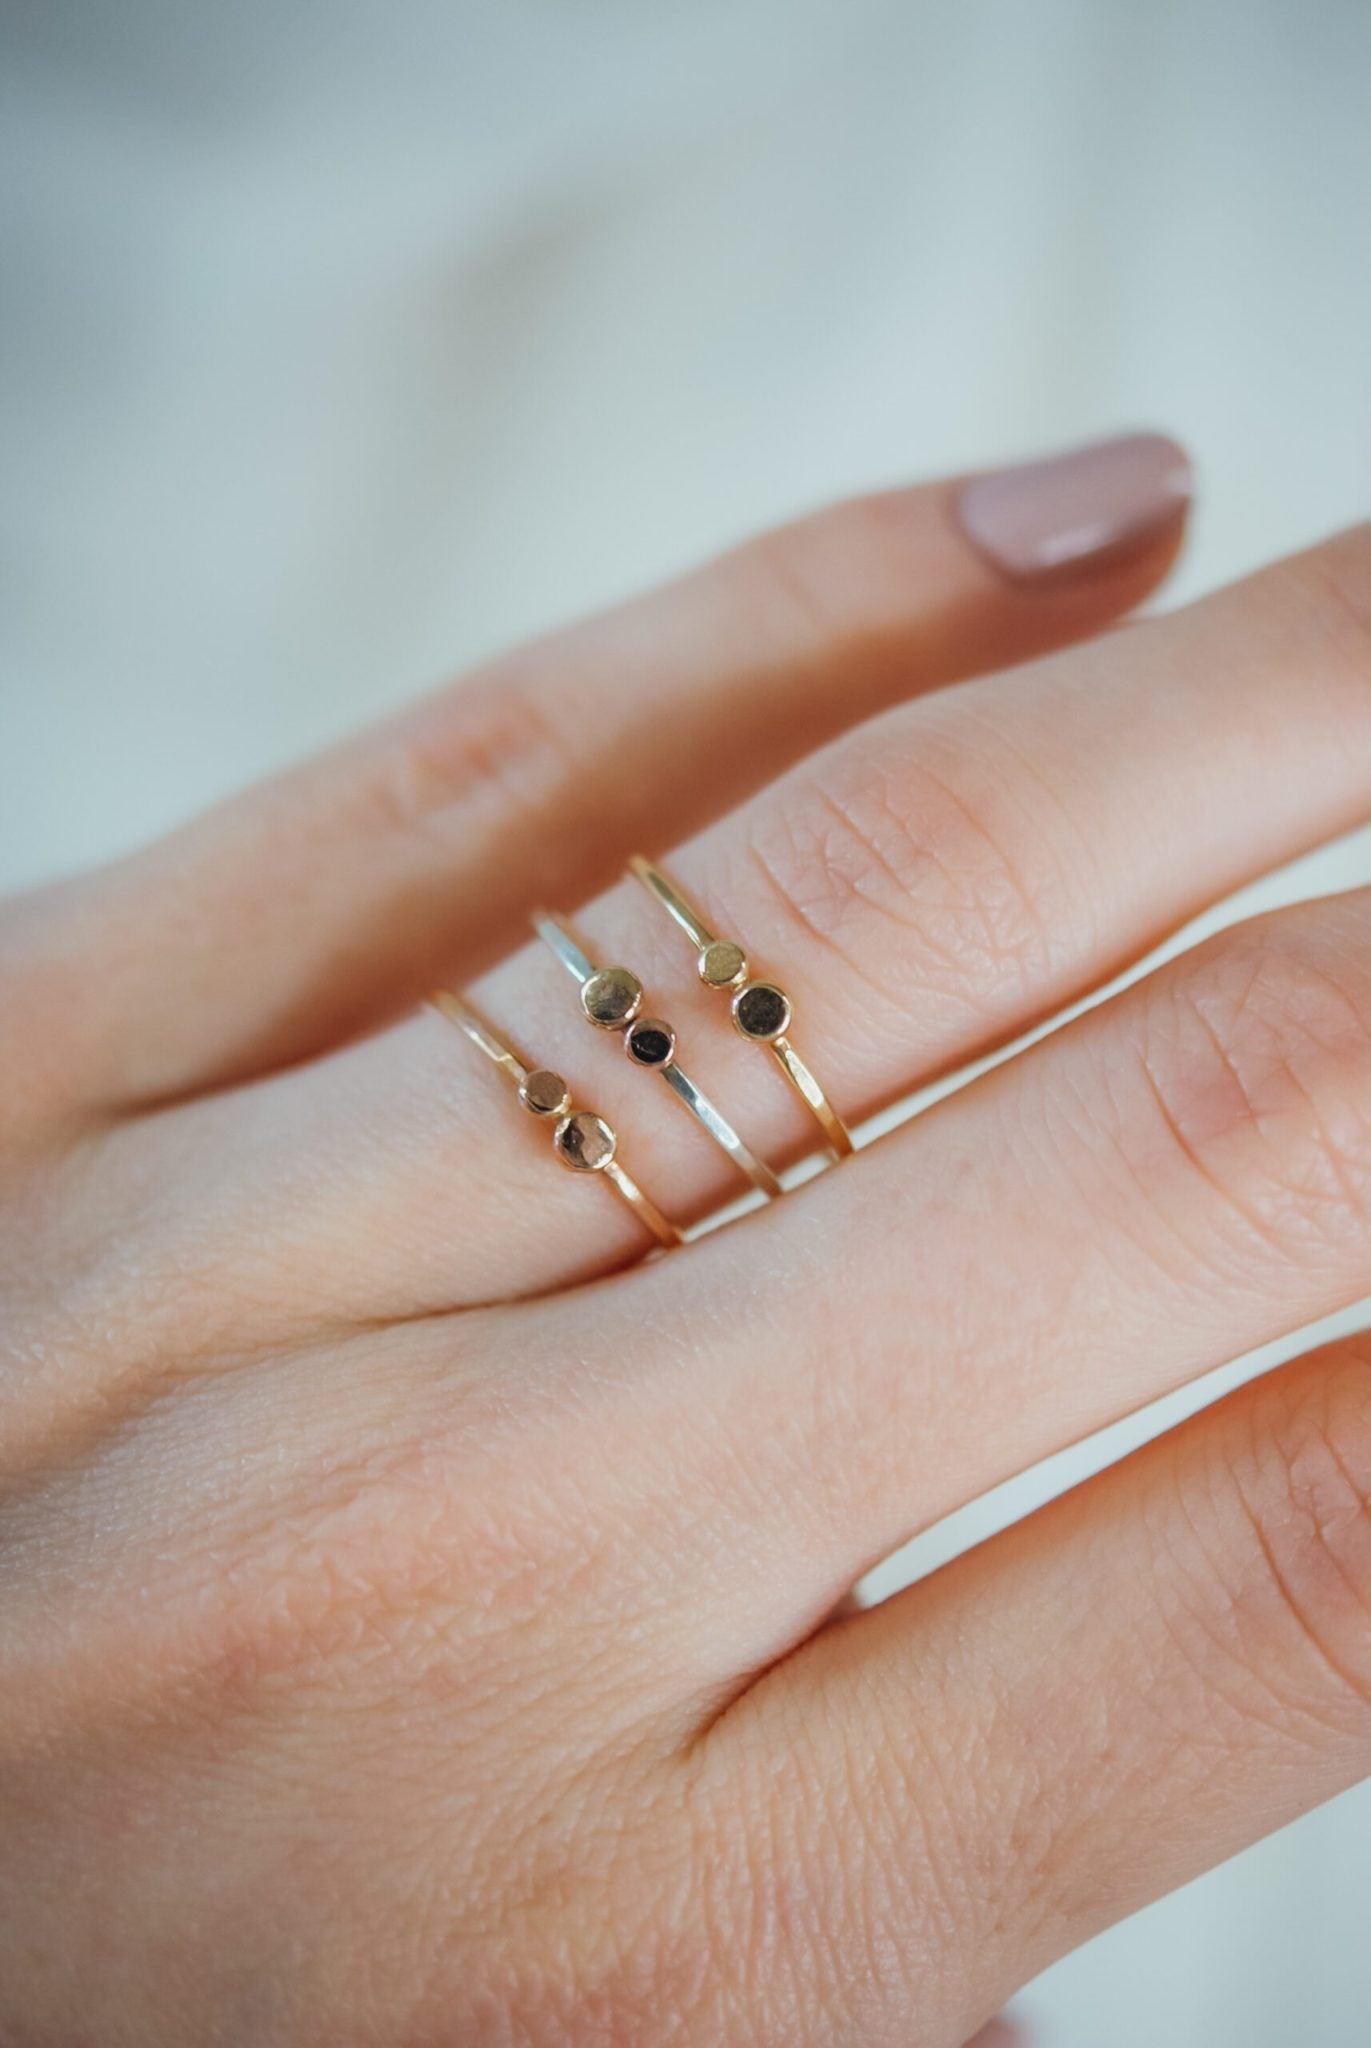 Double Pebble Ring, Solid 14K Rose Gold